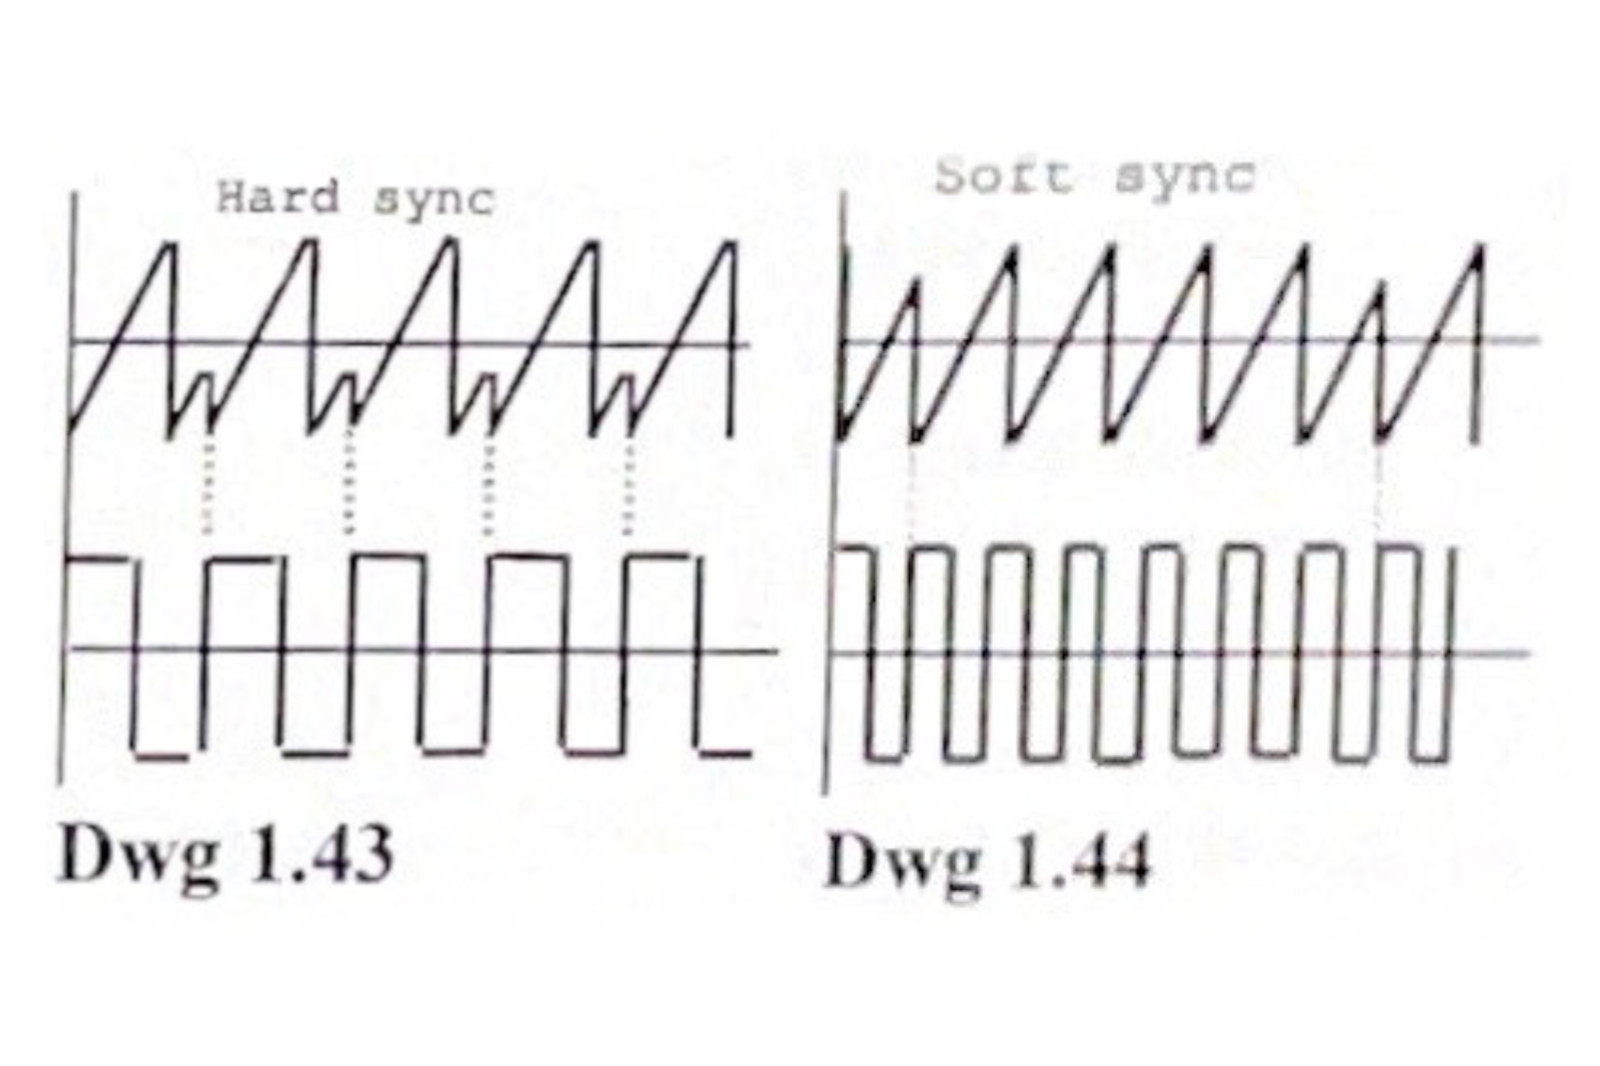 Hard and soft sync diagrams from the Fénix manual